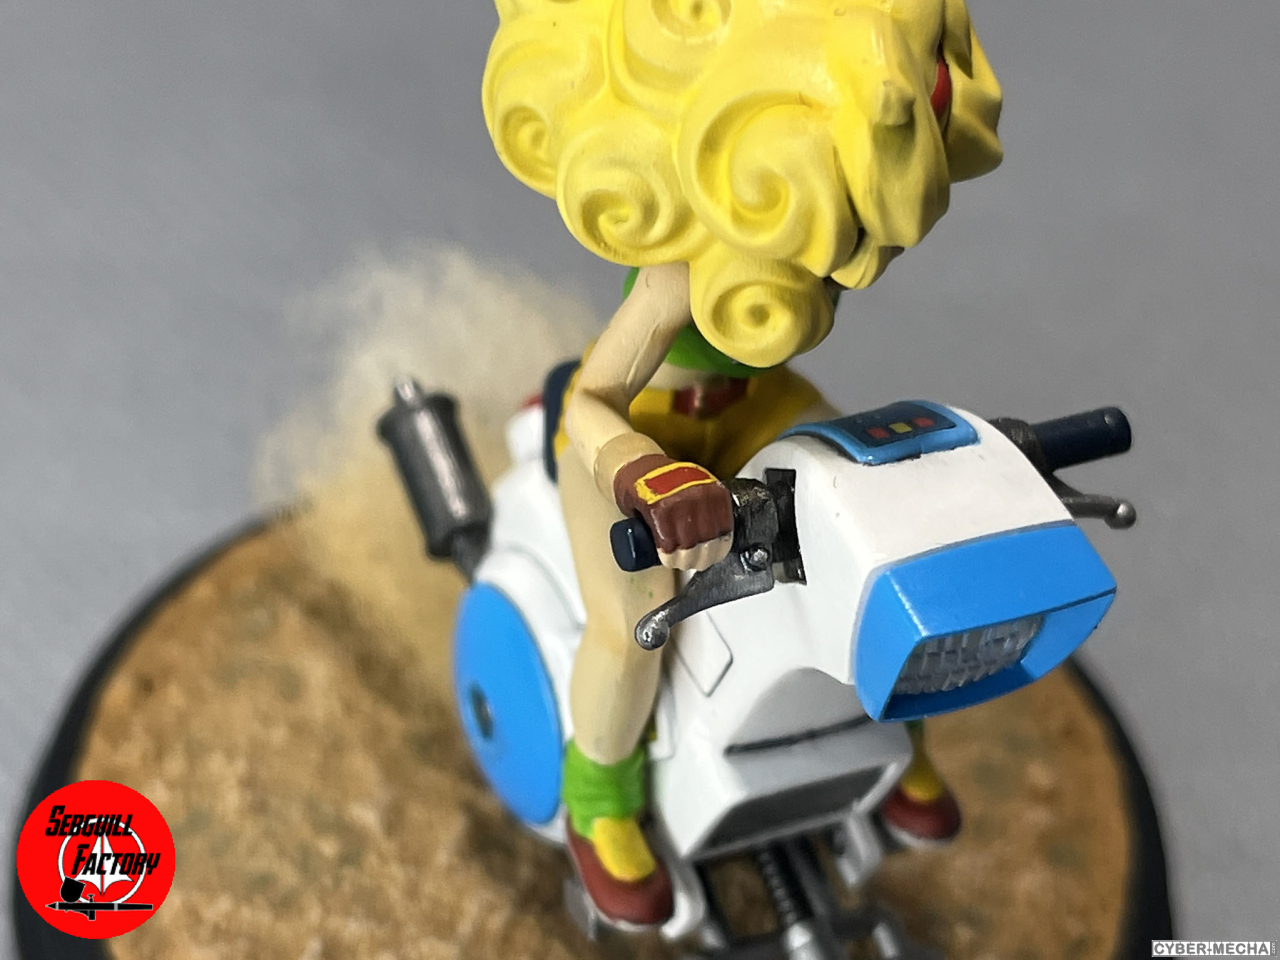 Dragon ball mecha collection 3 Lunch’s one wheel motorcycle 1678634582